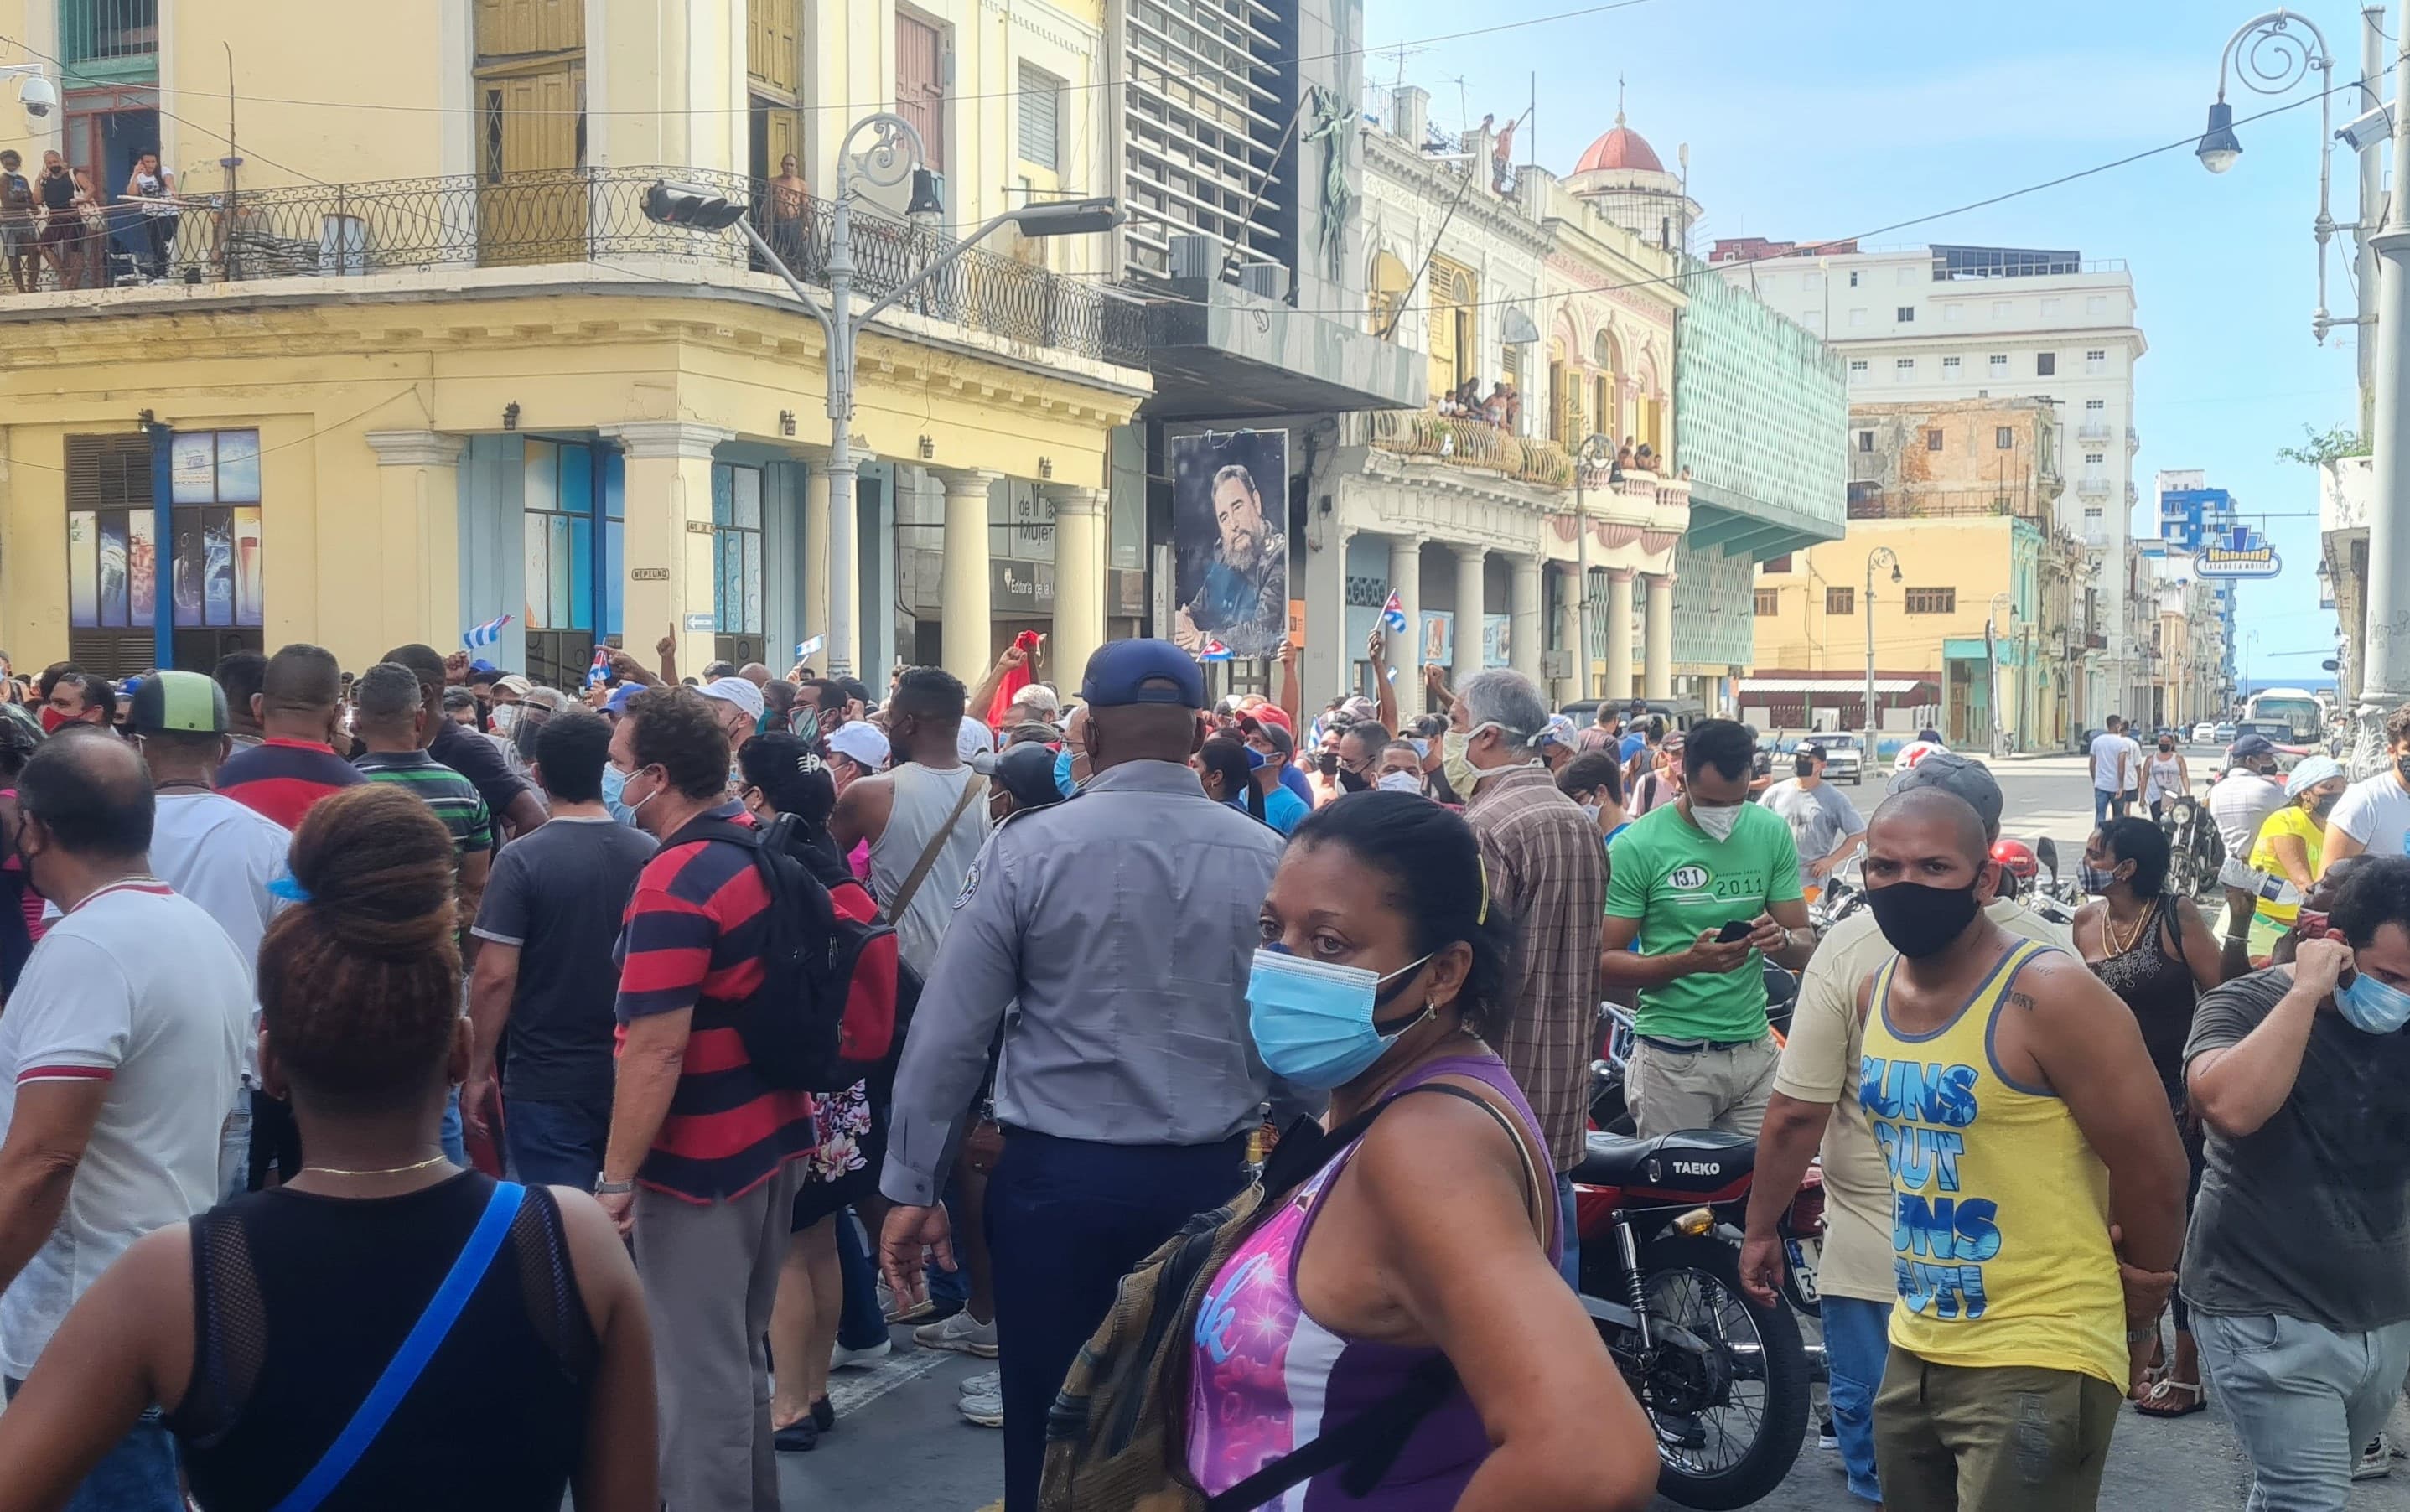 A group of protesters, some in masks, gather in an outdoor intersection in Cuba